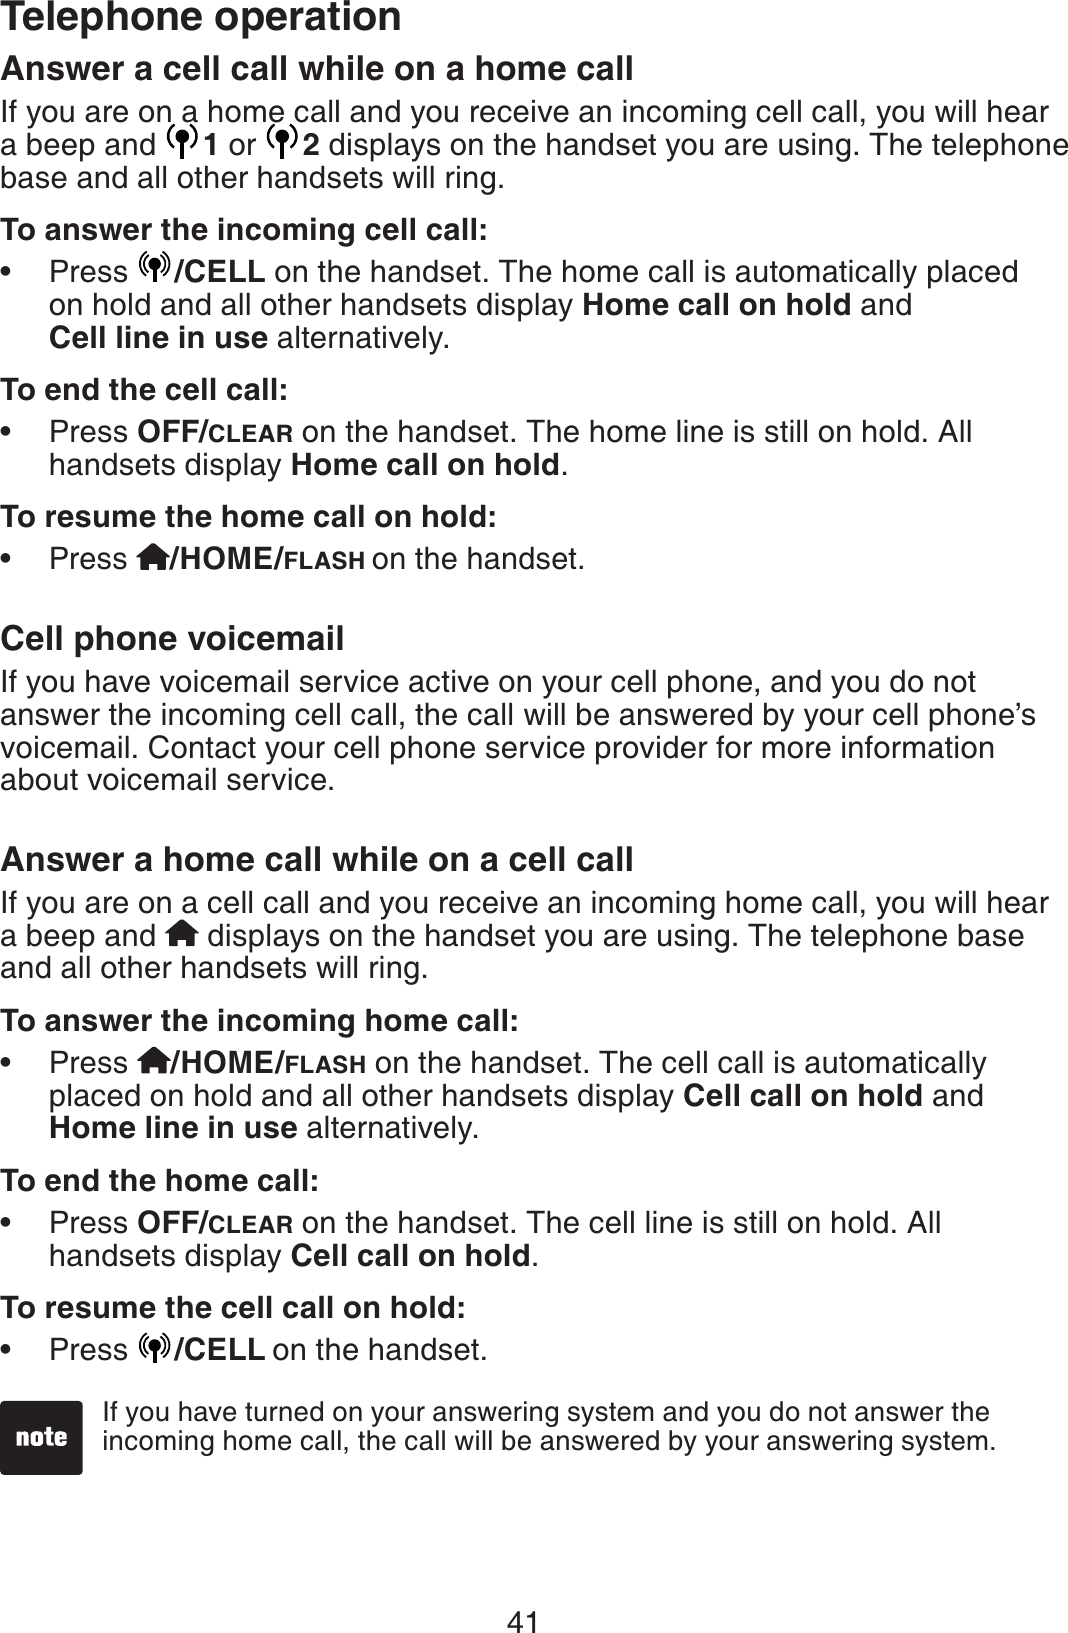 41Telephone operationAnswer a cell call while on a home callIf you are on a home call and you receive an incoming cell call, you will hear a beep and  1 or  2displays on the handset you are using. The telephone  base and all other handsets will ring.To answer the incoming cell call:Press  /CELL on the handset. The home call is automatically placed on hold and all other handsets display Home call on hold andCell line in use alternatively.To end the cell call:Press OFF/CLEAR on the handset. The home line is still on hold. All handsets display Home call on hold.To resume the home call on hold:Press  /HOME/FLASH on the handset.Cell phone voicemailIf you have voicemail service active on your cell phone, and you do not answer the incoming cell call, the call will be answered by your cell phone’s voicemail. Contact your cell phone service provider for more information about voicemail service.Answer a home call while on a cell callIf you are on a cell call and you receive an incoming home call, you will hear a beep and   displays on the handset you are using. The telephone base and all other handsets will ring.To answer the incoming home call:Press /HOME/FLASH on the handset. The cell call is automatically placed on hold and all other handsets display Cell call on hold and Home line in use alternatively.To end the home call:Press OFF/CLEAR on the handset. The cell line is still on hold. All handsets display Cell call on hold.To resume the cell call on hold:Press  /CELL on the handset.••••••If you have turned on your answering system and you do not answer the incoming home call, the call will be answered by your answering system.